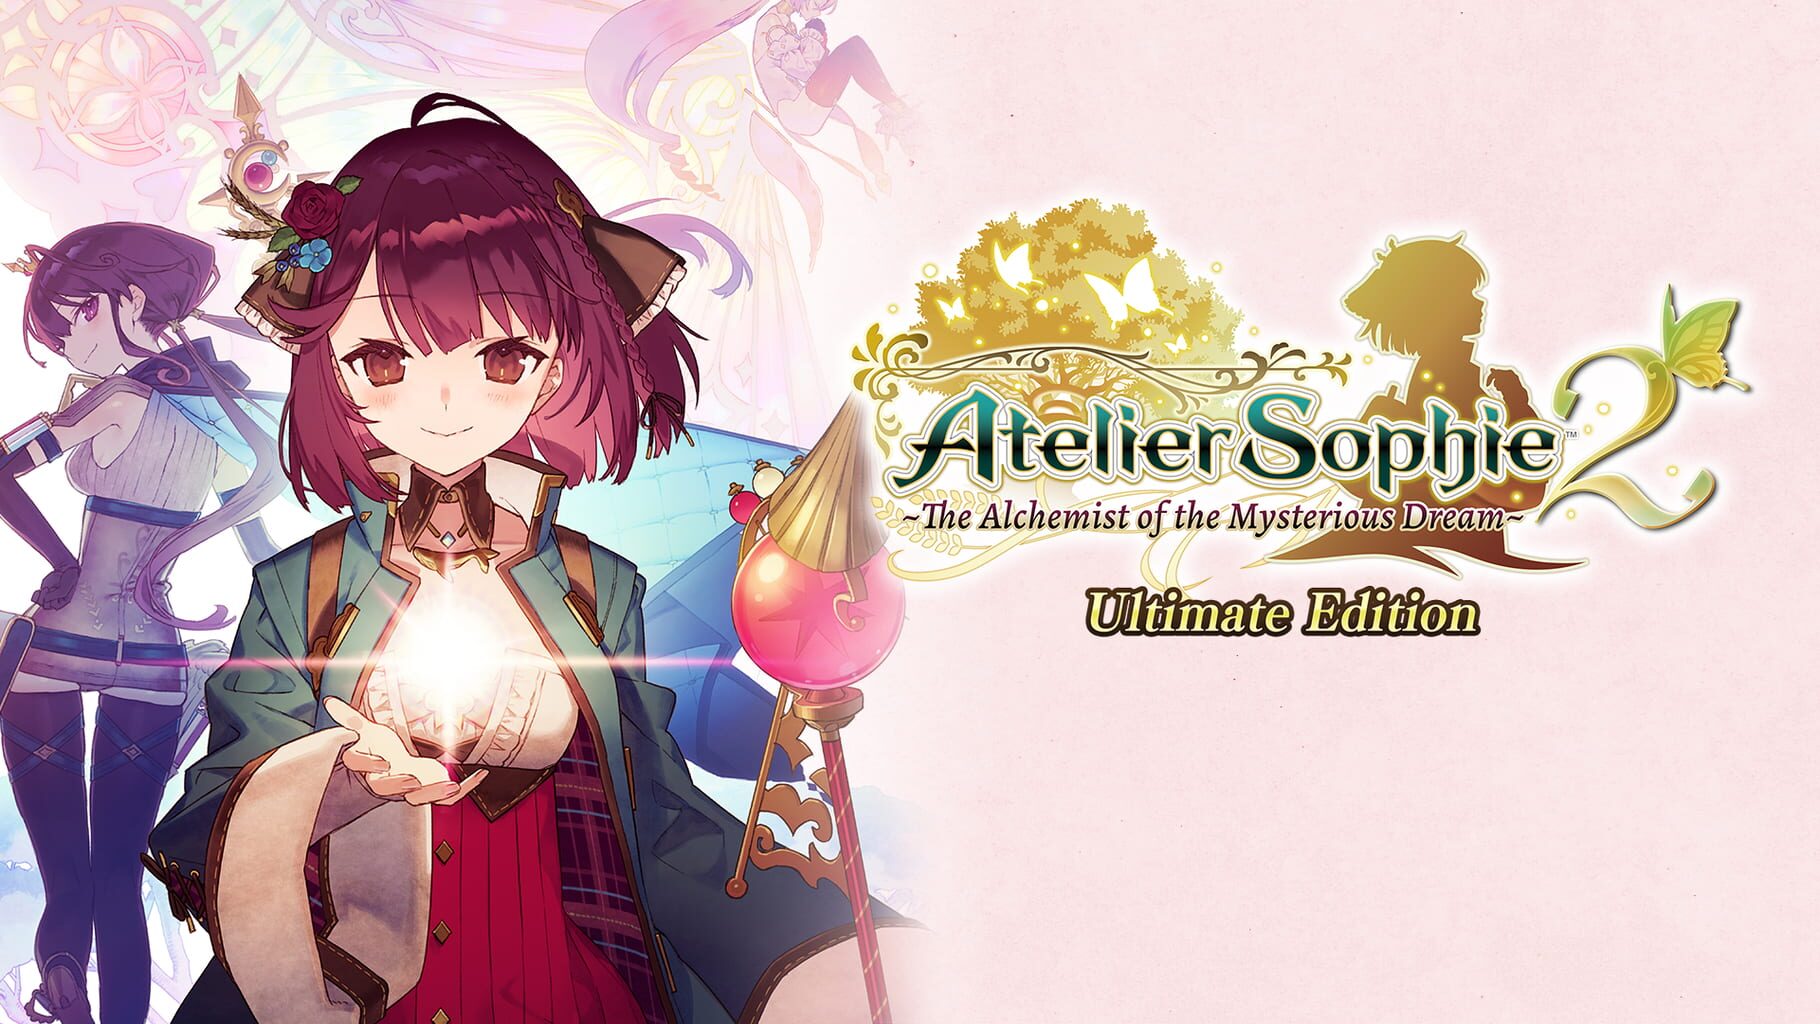 Atelier Sophie 2: The Alchemist of the Mysterious Dream - Ultimate Edition artwork